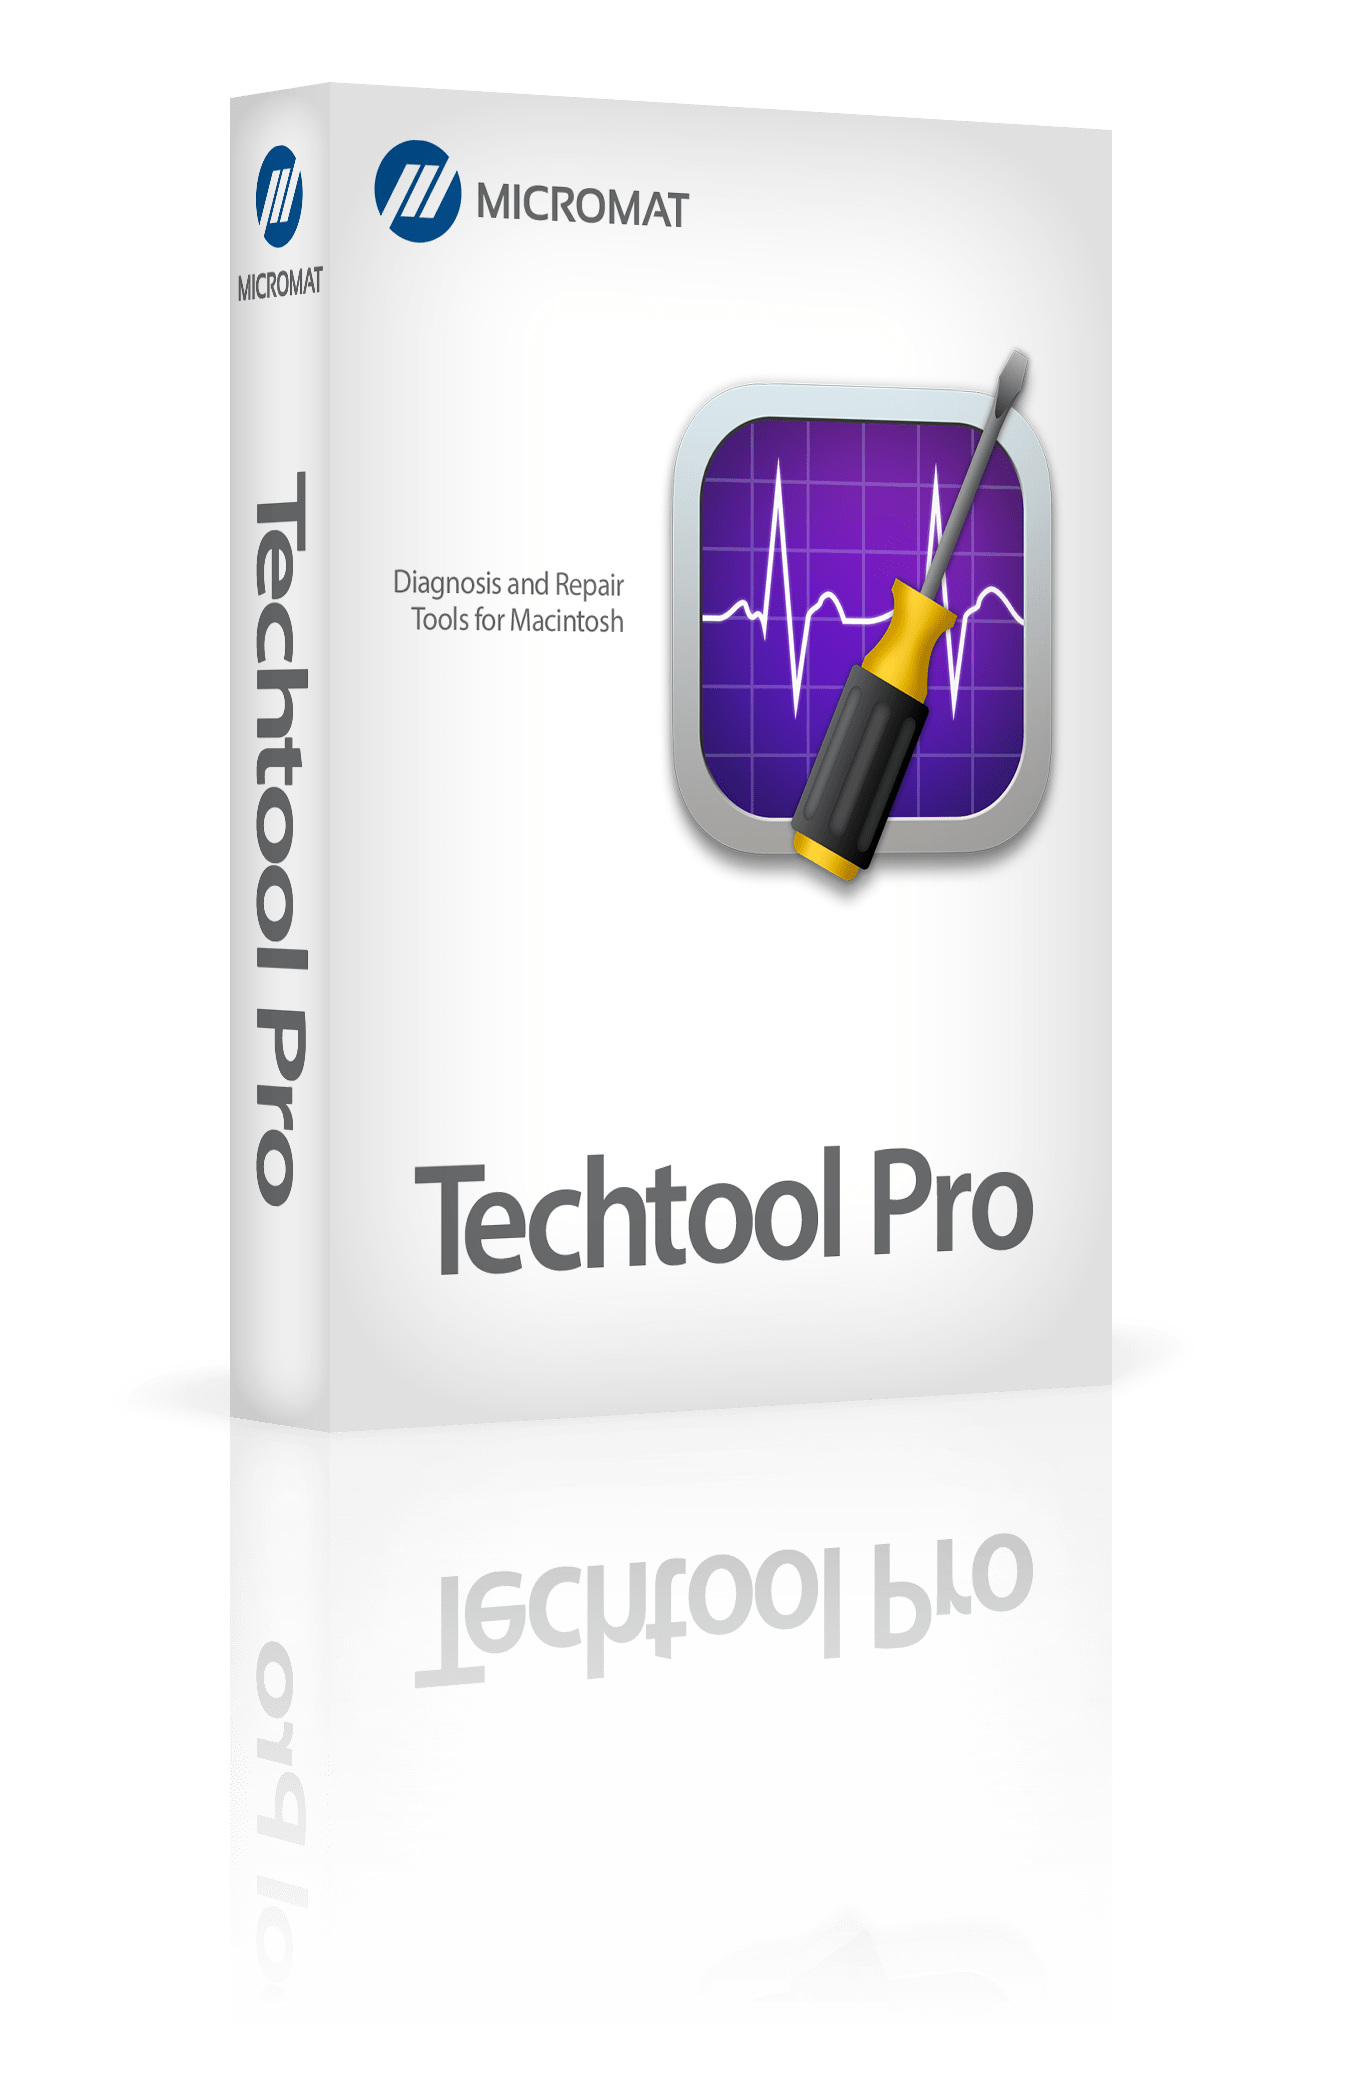 Micromat launches TechTool Pro 7, a new version of its diagnostic and repair tool for Mac